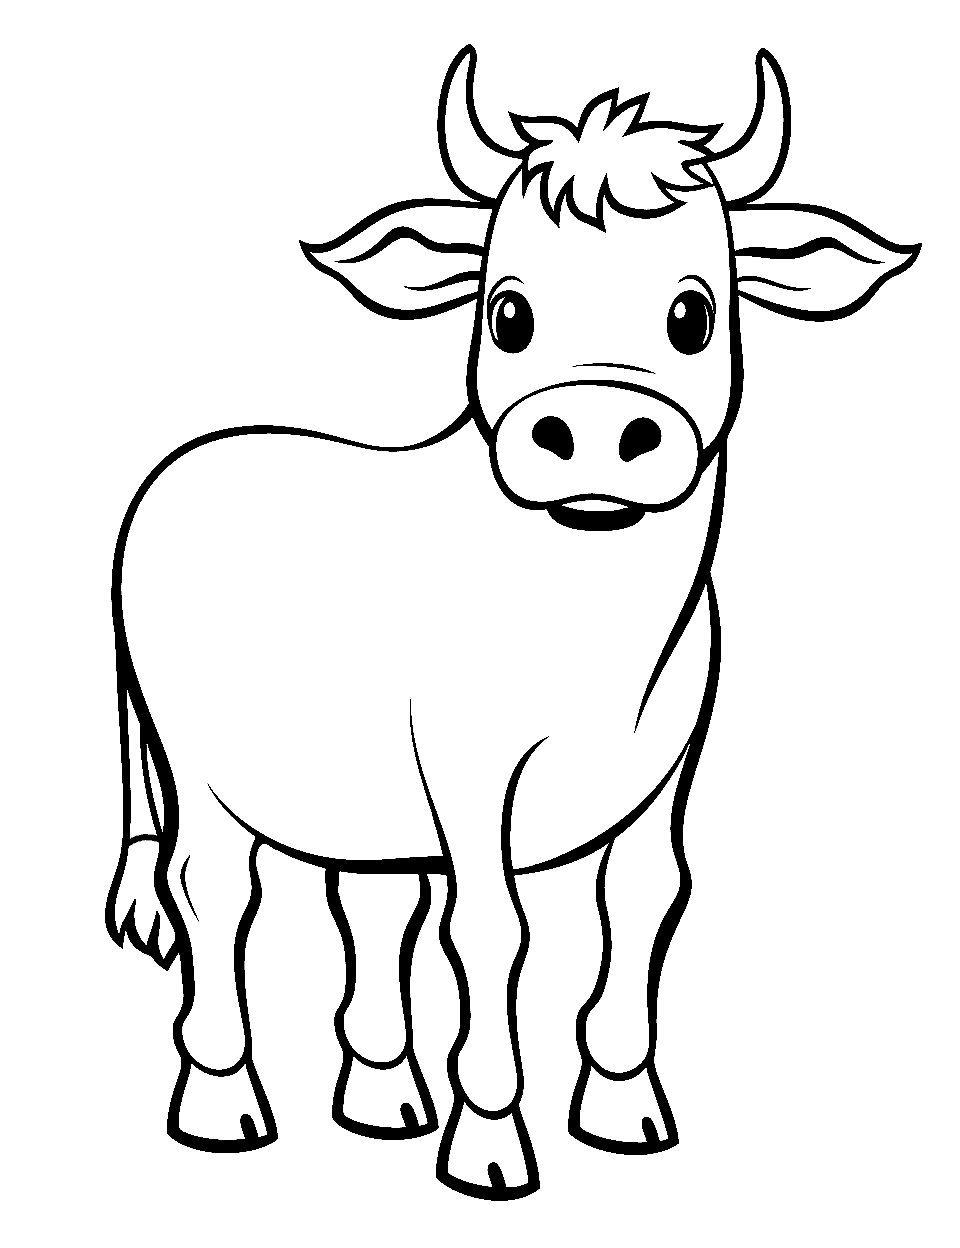 Easy Peasy Cow Coloring Page - A simplified cartoonish cow standing happily in a plain.